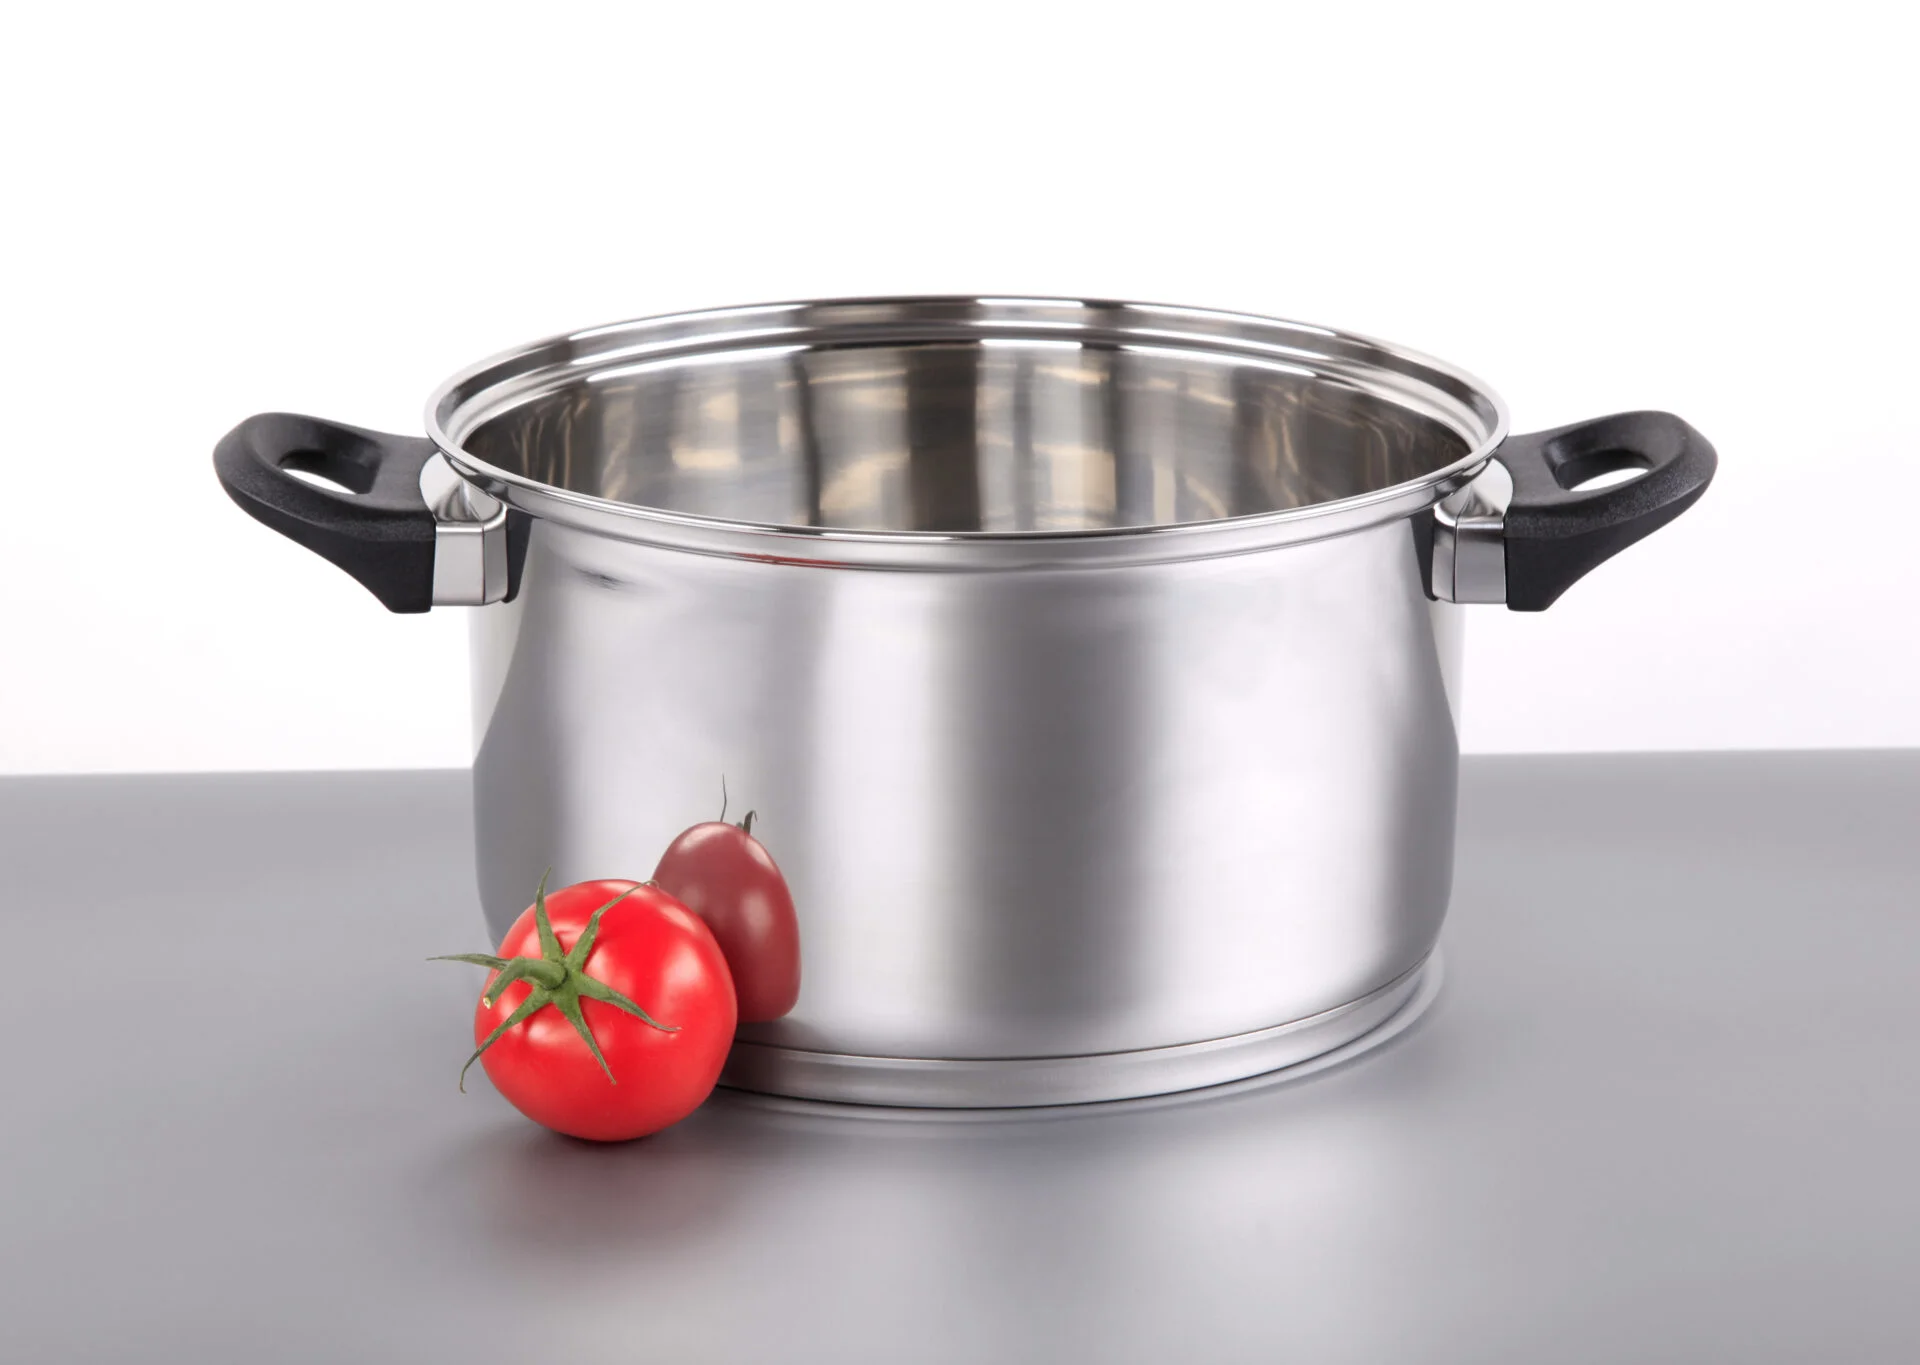 Shiny stainless steel pot and a tomato